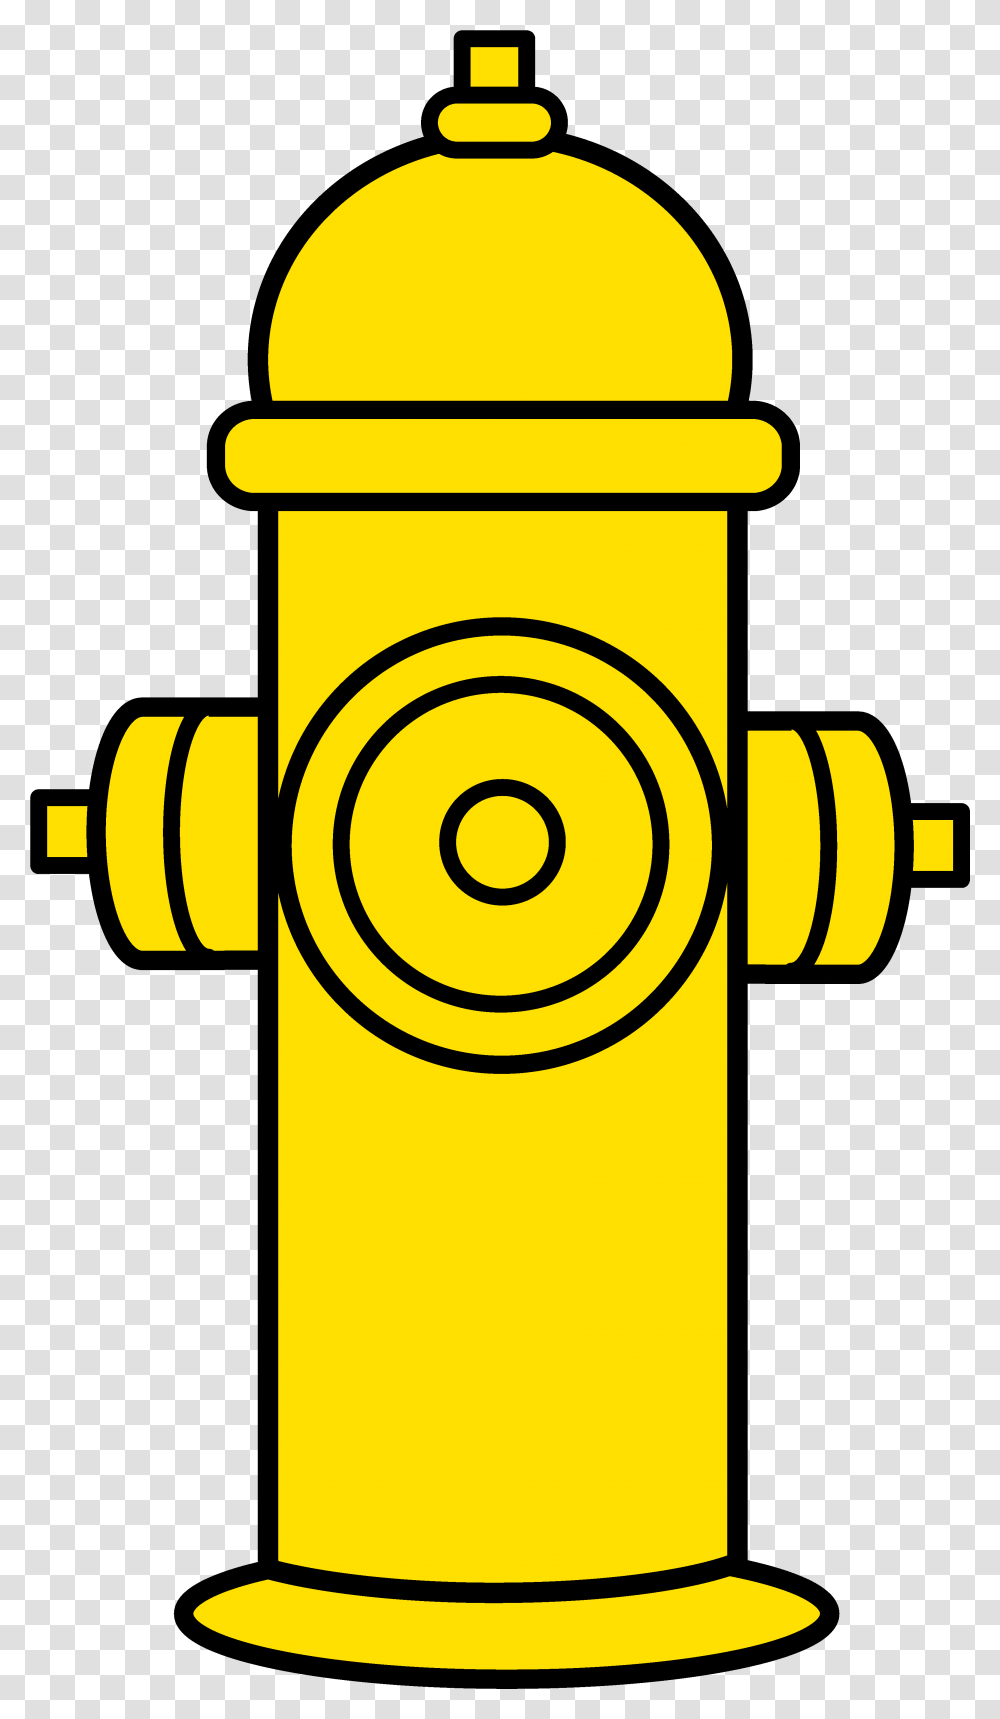 Sense Of Taste Clipart Yellow Fire Hydrant Clipart Transparent Png